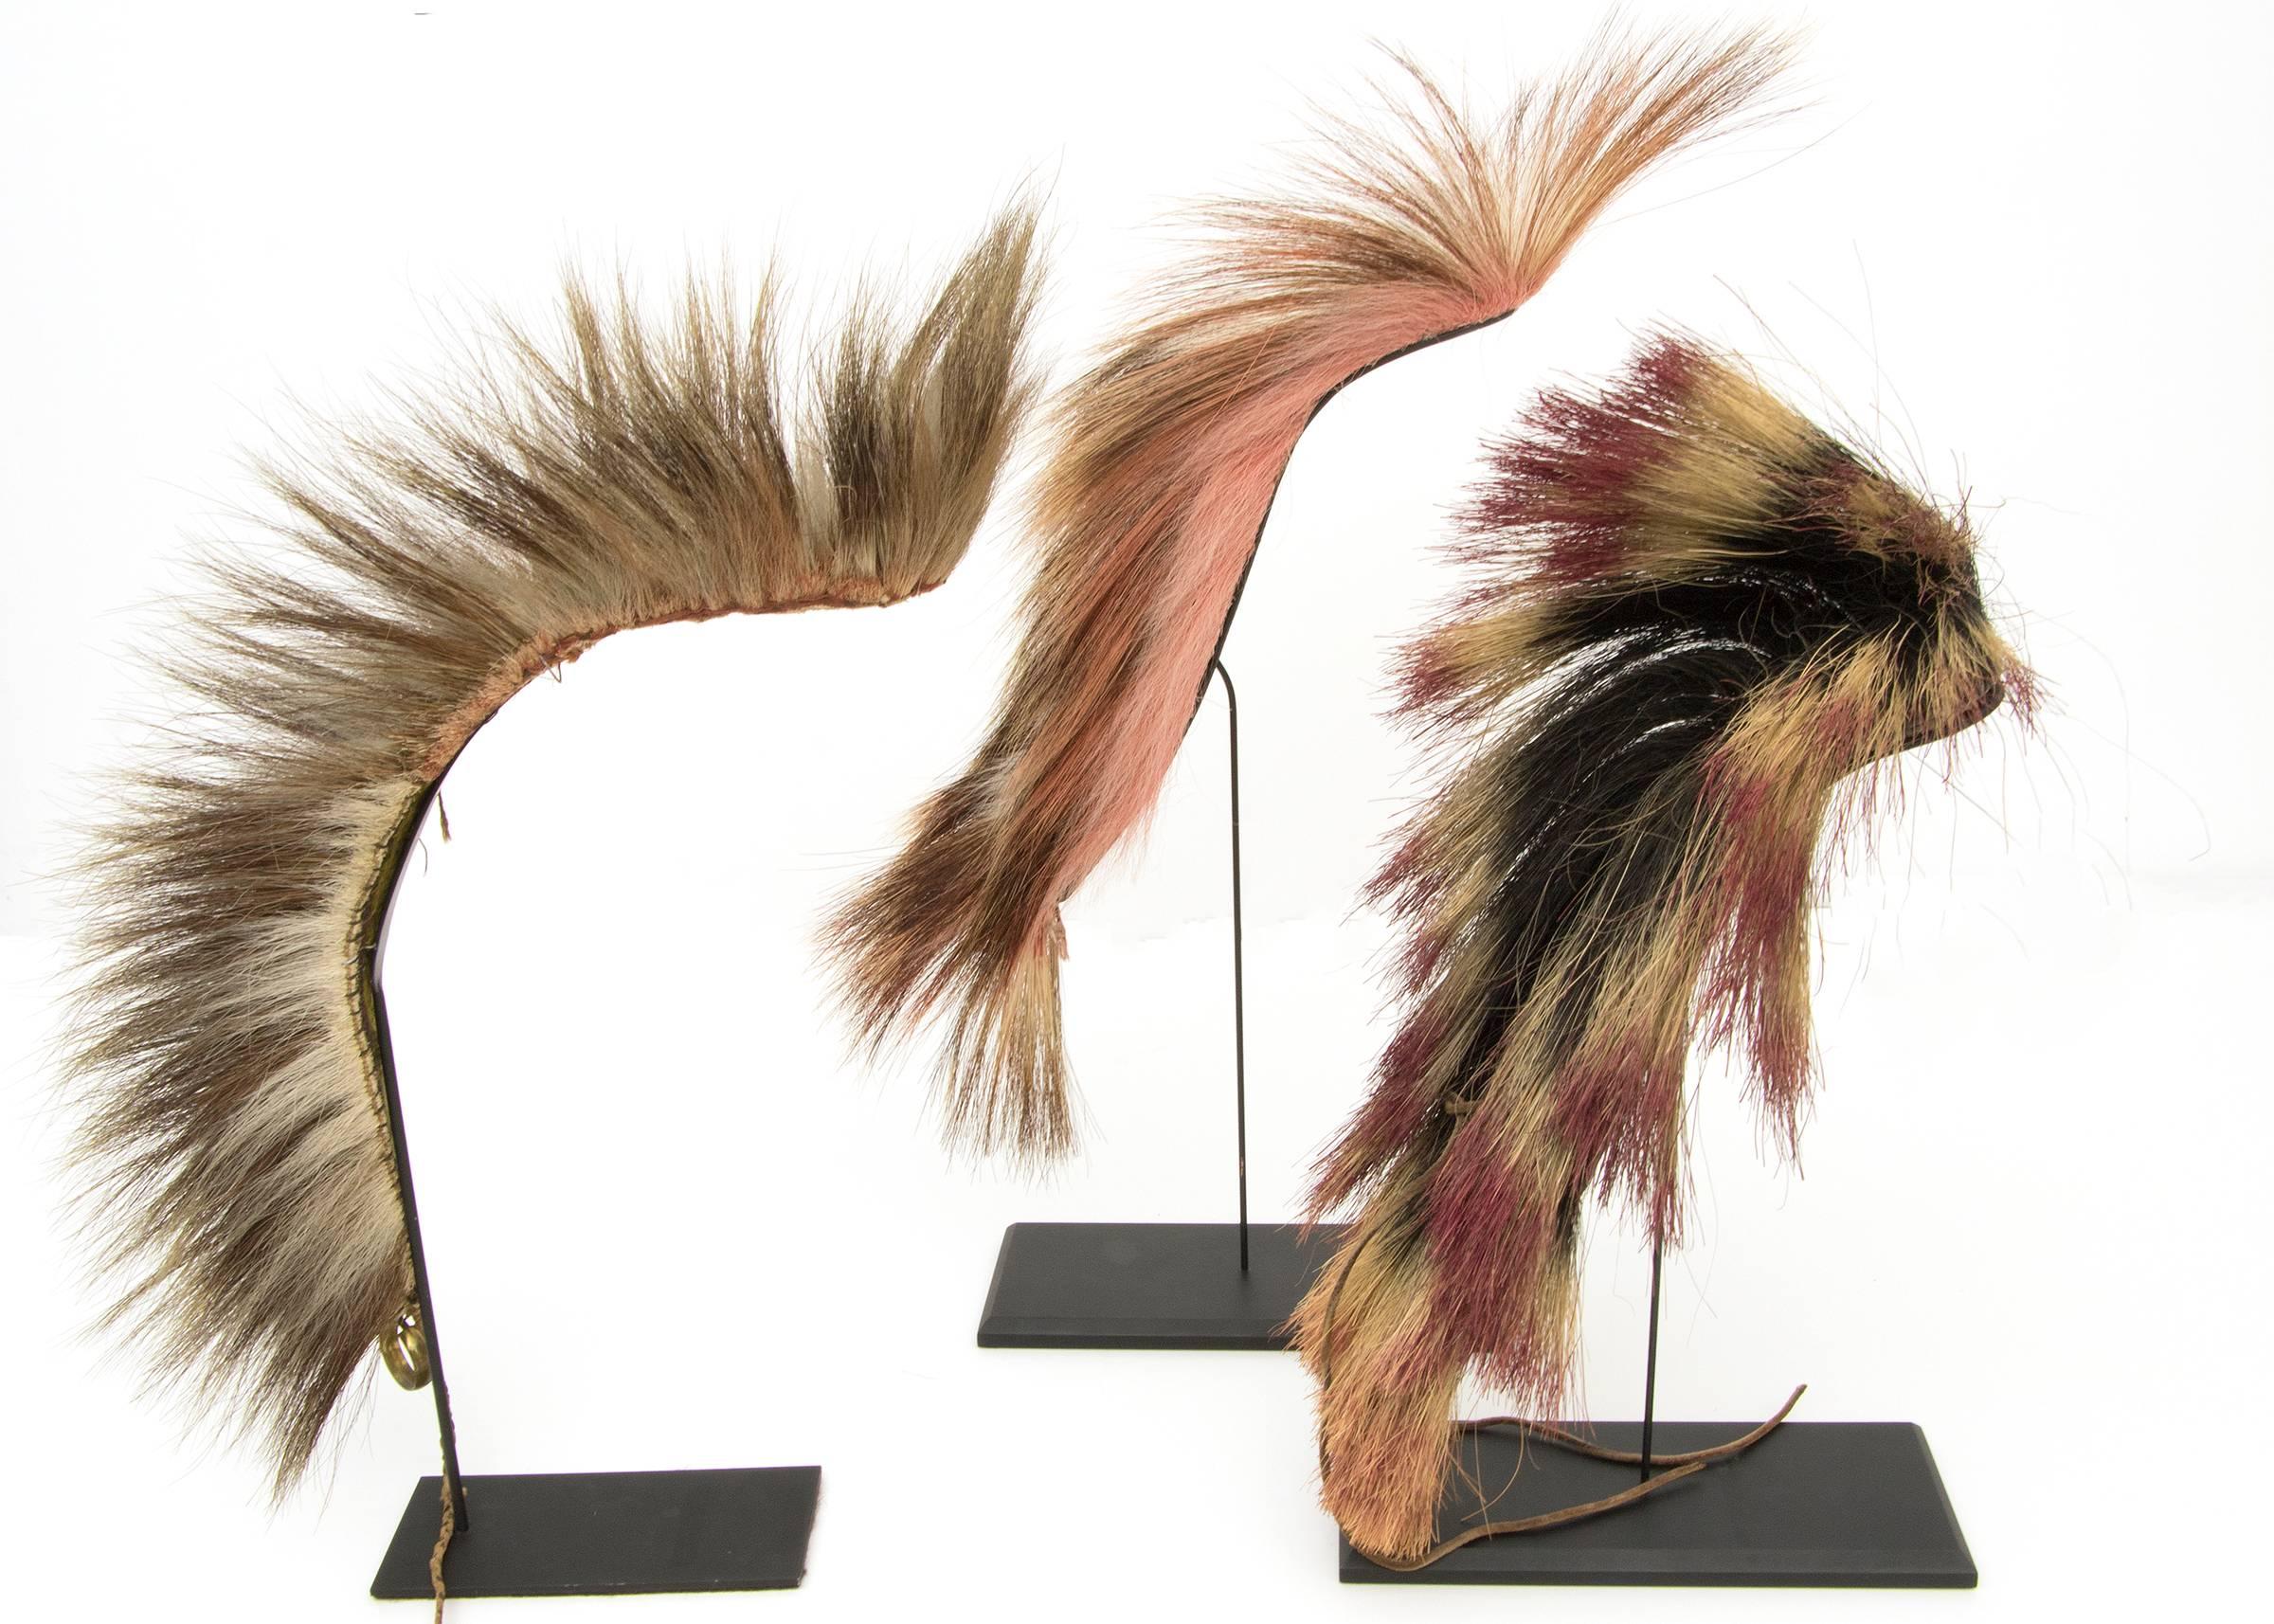 A group of three antique Roach Headdresses/Hair Ornaments. Custom display stands are included.

Left: Plains Roach, circa 1890. Made of badger and porcupine guard hair with traces of red dye. Purple, green, and red yarn base with small hole at